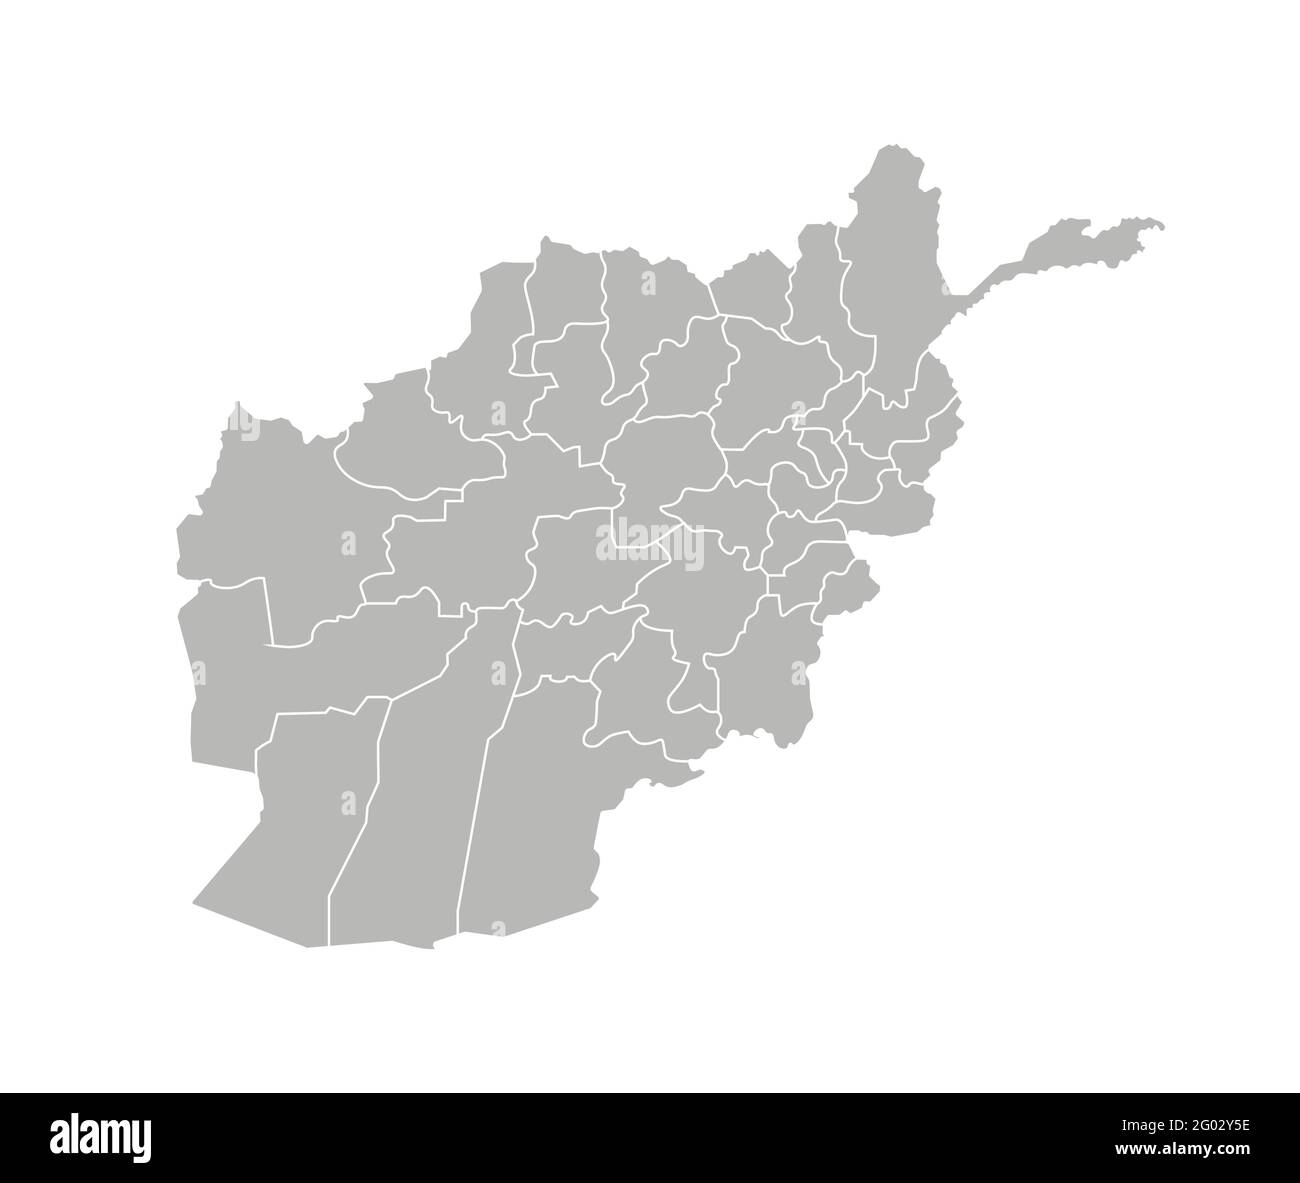 Vector isolated illustration of simplified administrative map of Afghanistan. Borders of the provinces (regions). Grey silhouettes. White outline. Stock Vector